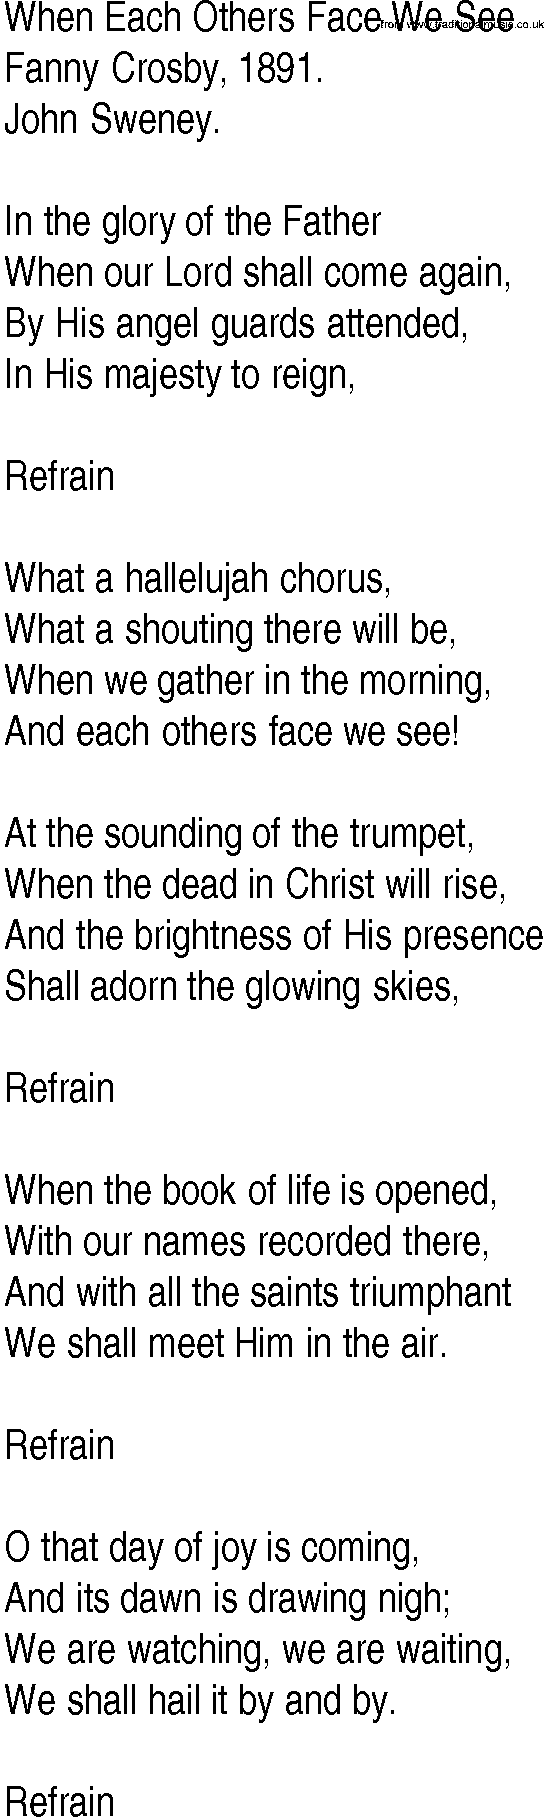 Hymn and Gospel Song: When Each Others Face We See by Fanny Crosby lyrics